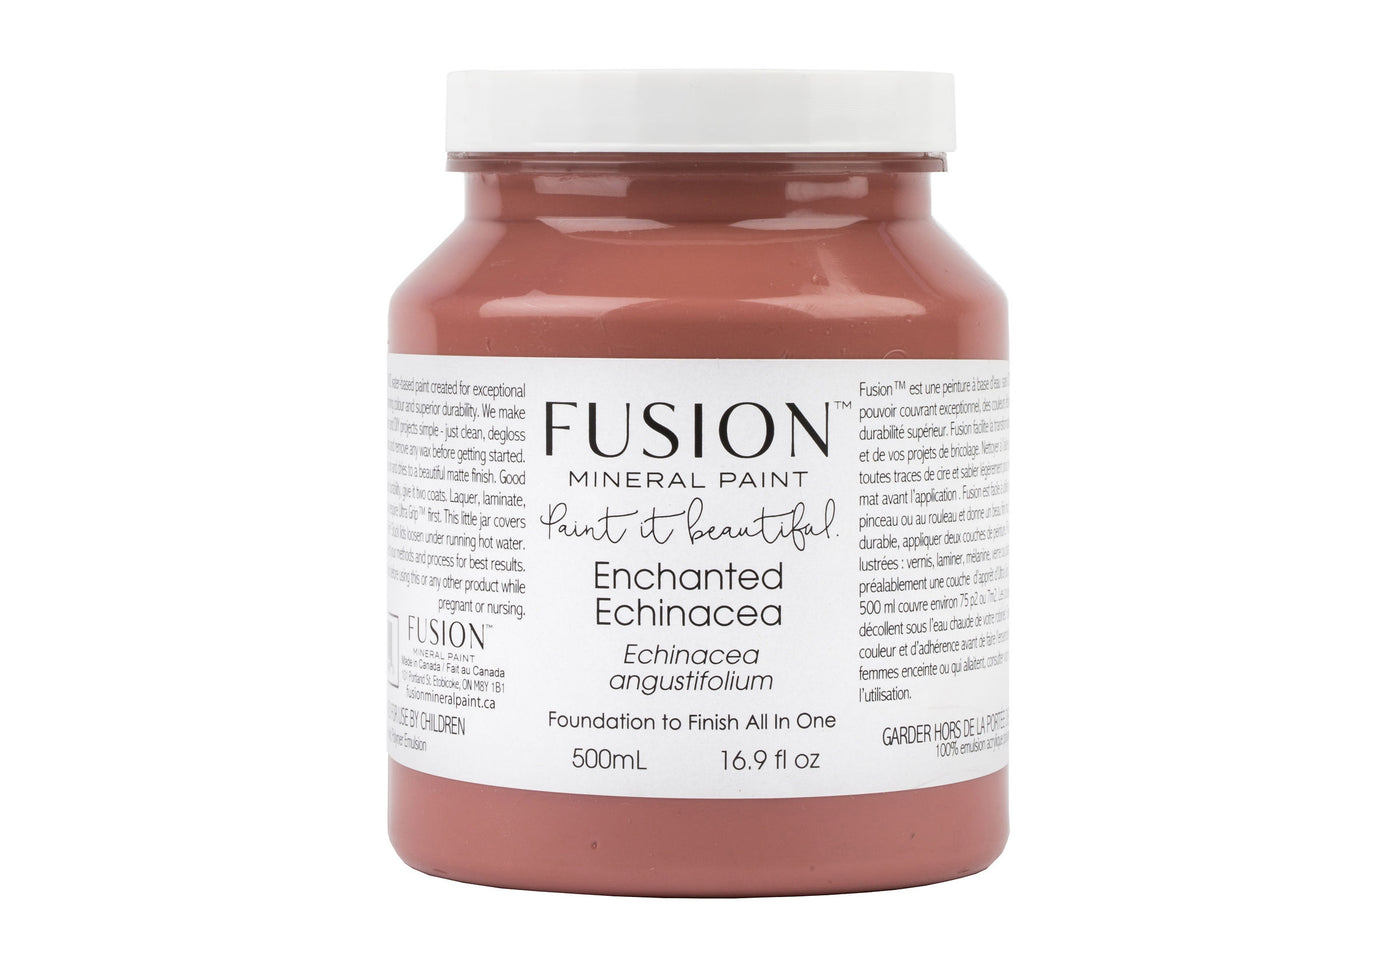 Warm rose 500ml pint from Fusion Mineral Paint